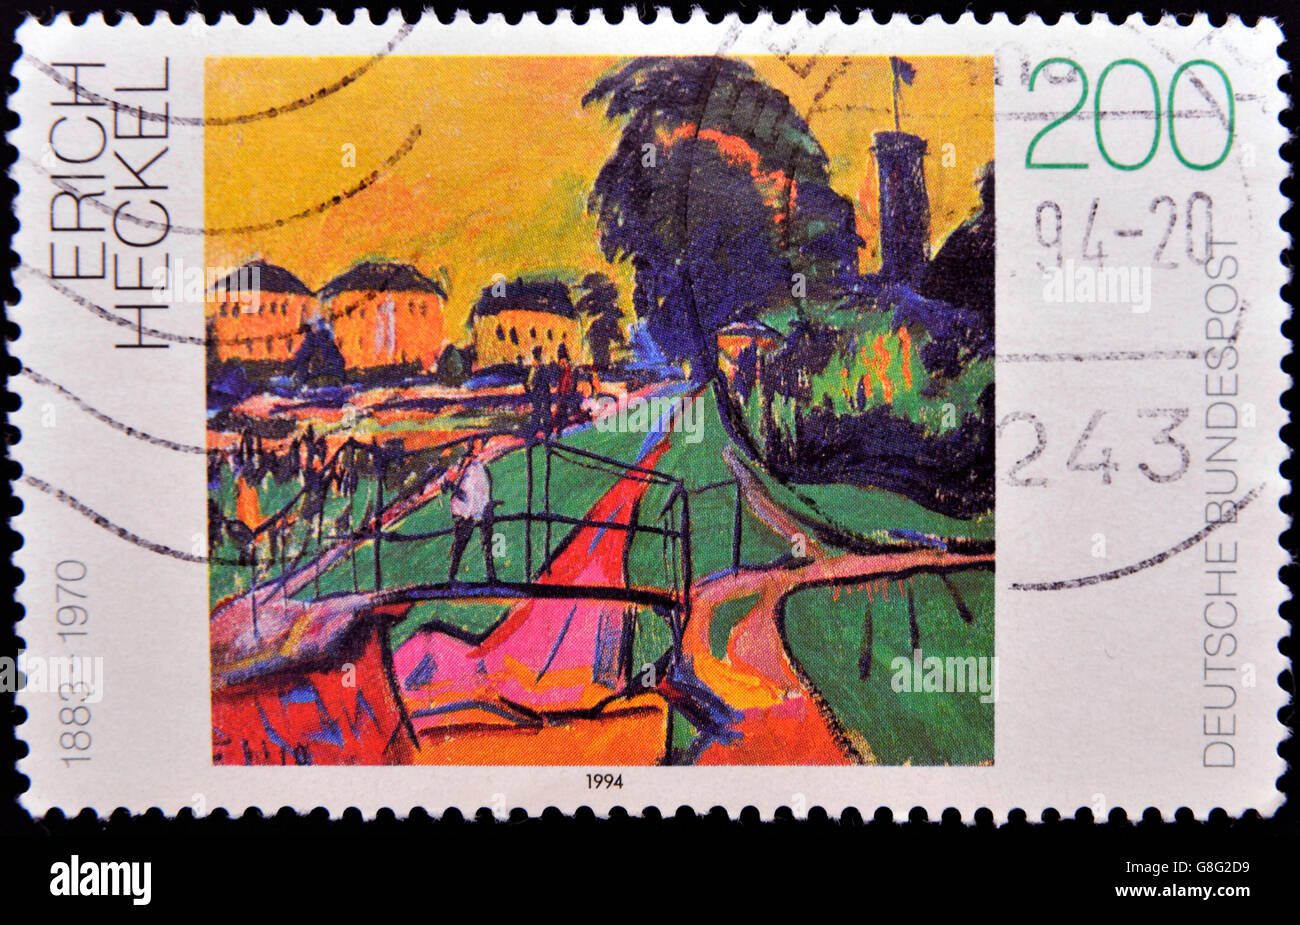 GERMANY - CIRCA 1994: A stamp printed in Germany shows Landscape by Erich Heckel, circa 1994 Stock Photo